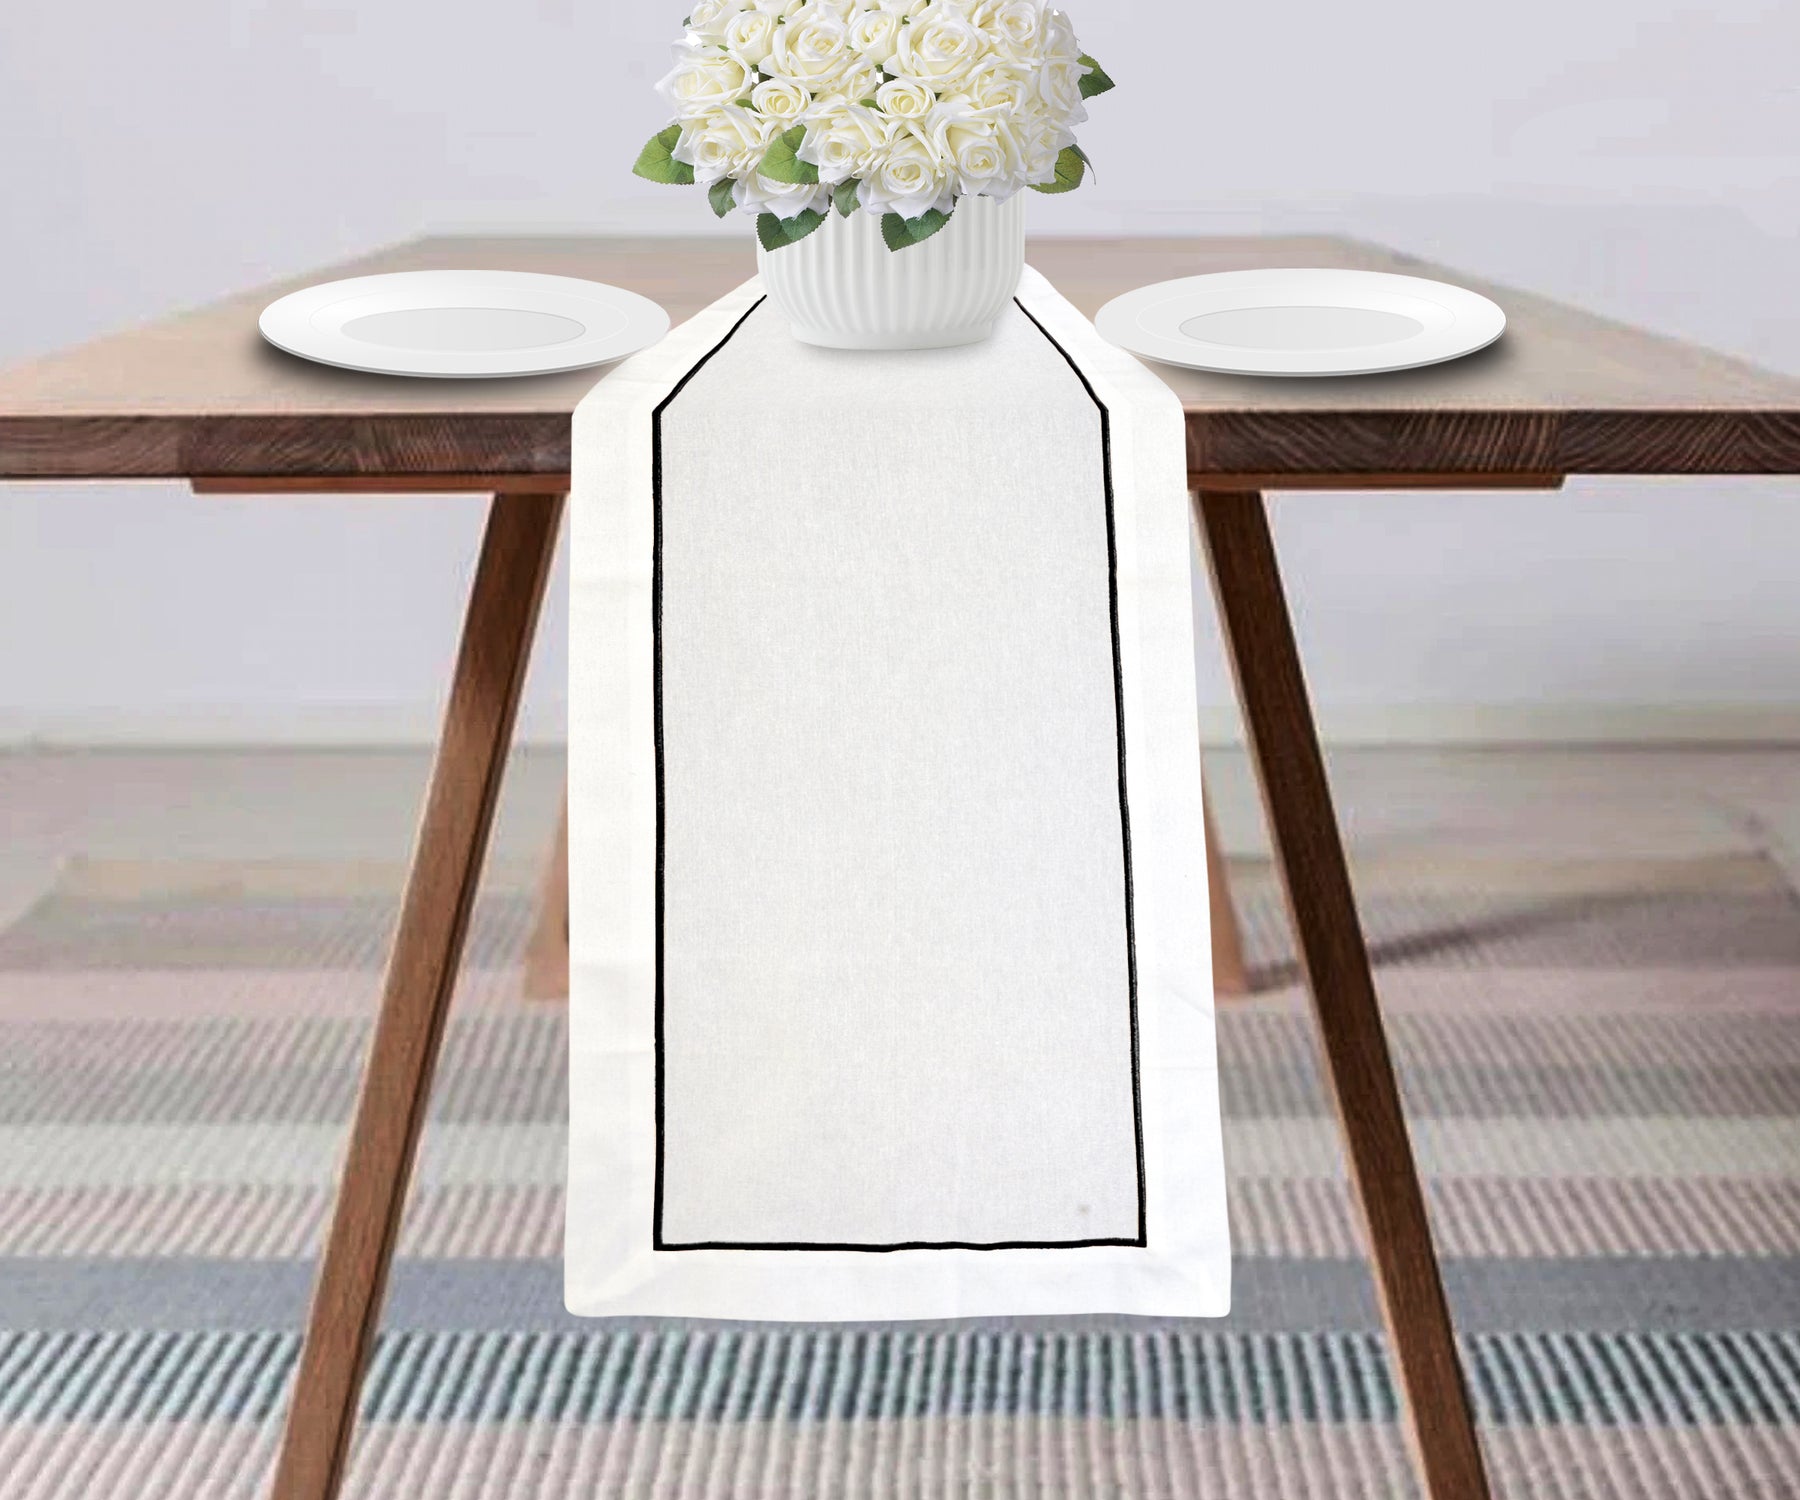 Elegant and versatile cotton table runner for any occasion.